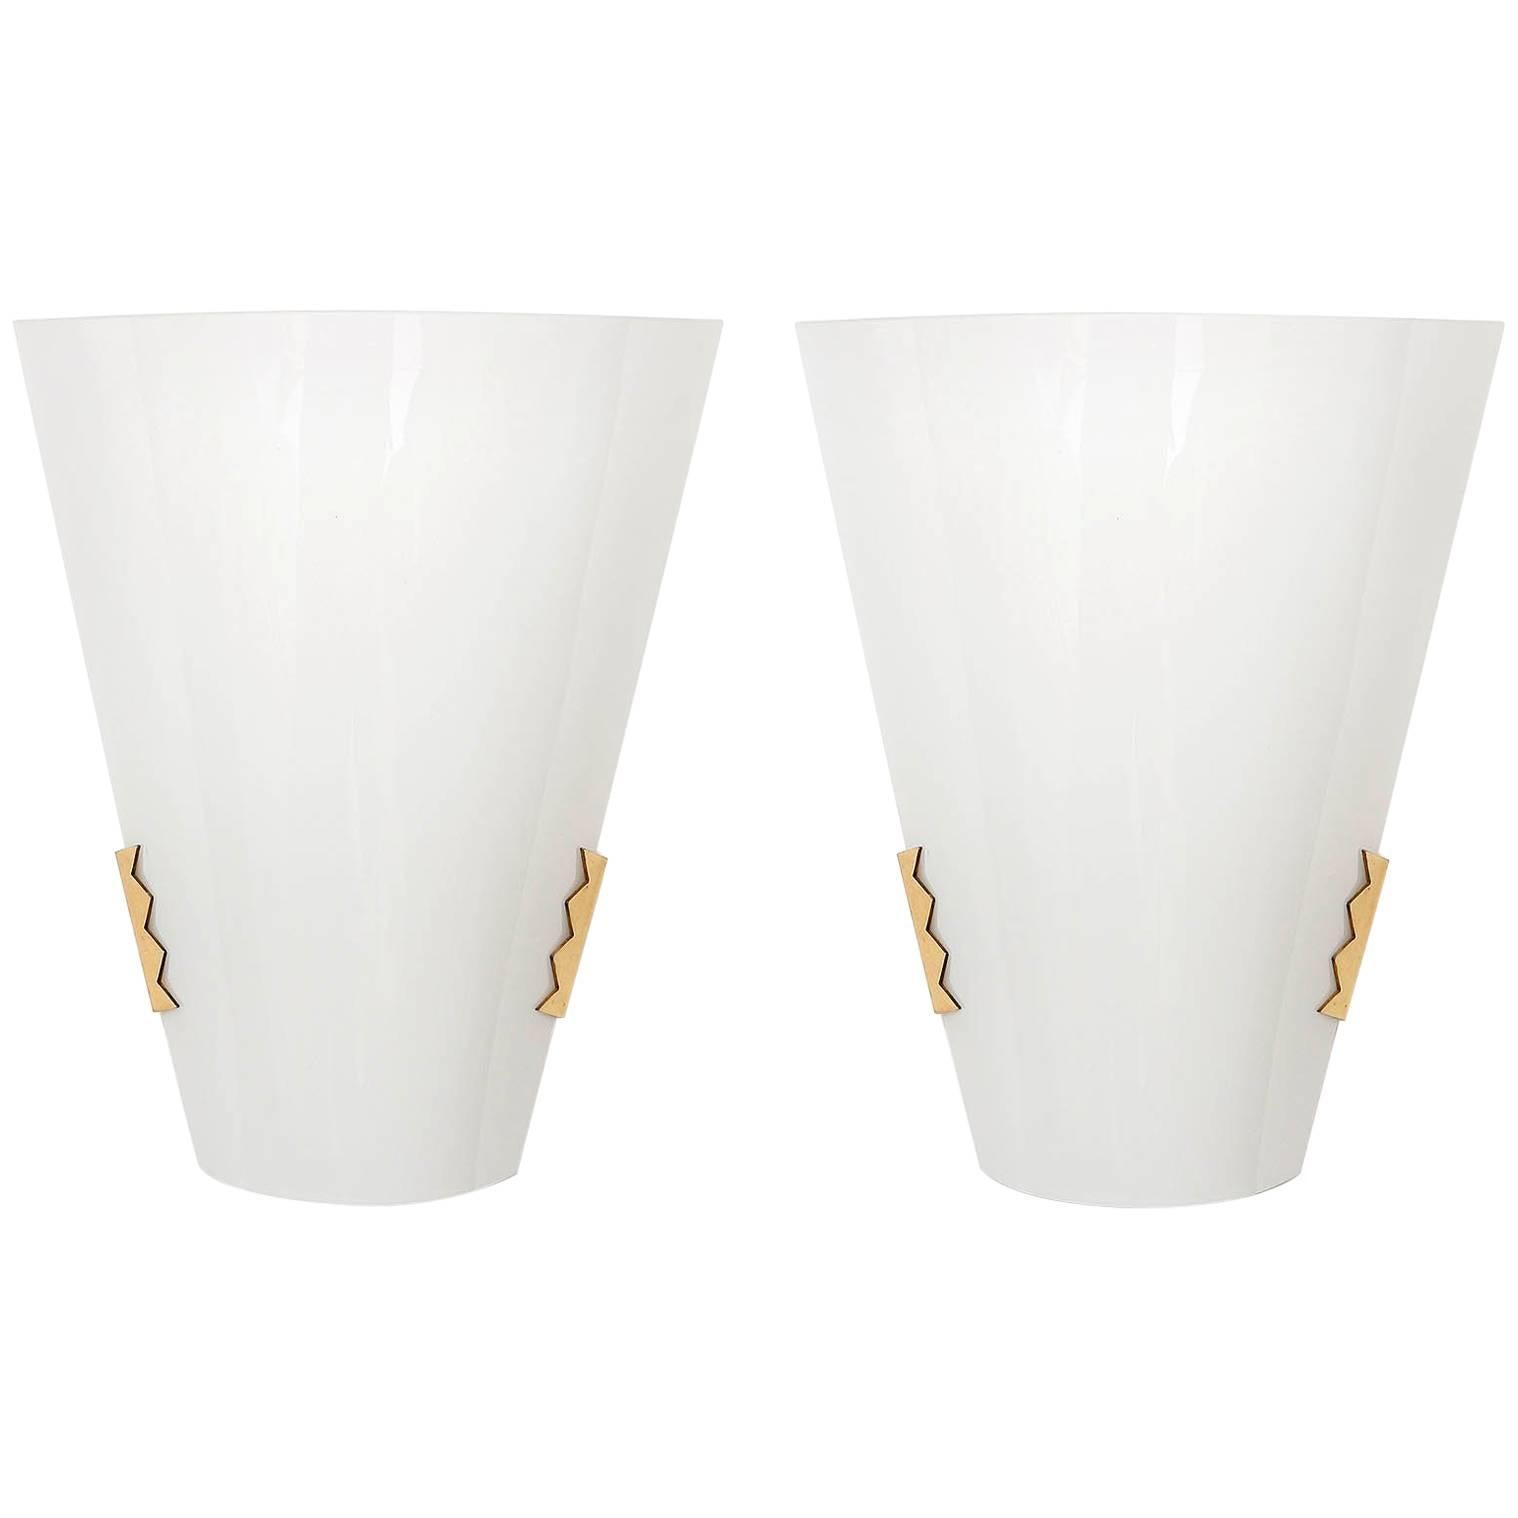 A set of three polished brass and white opaline glass wall lamps by J.T. Kalmar, Austria, manufactured in Mid-Century, circa 1970.
A brass mounting fixture holds a bent opal glass.
Each light takes one medium base Edison bulb.

The price is per